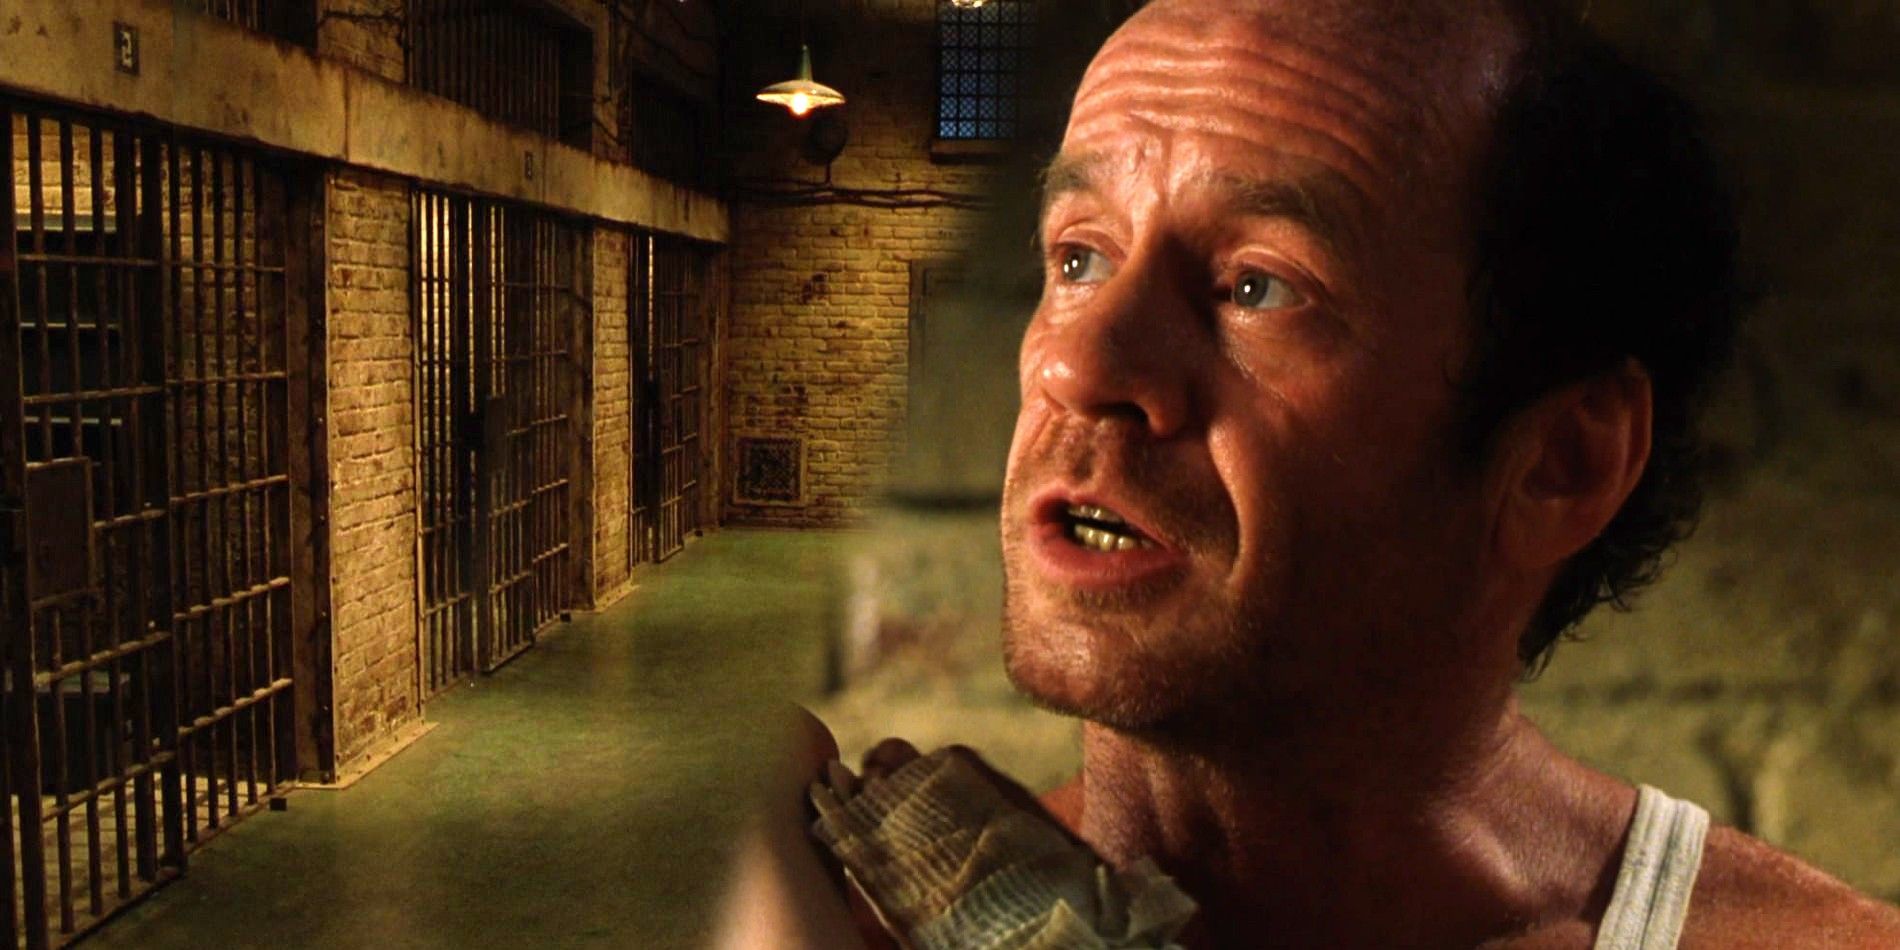 Why was Del on Death Row in The Green Mile